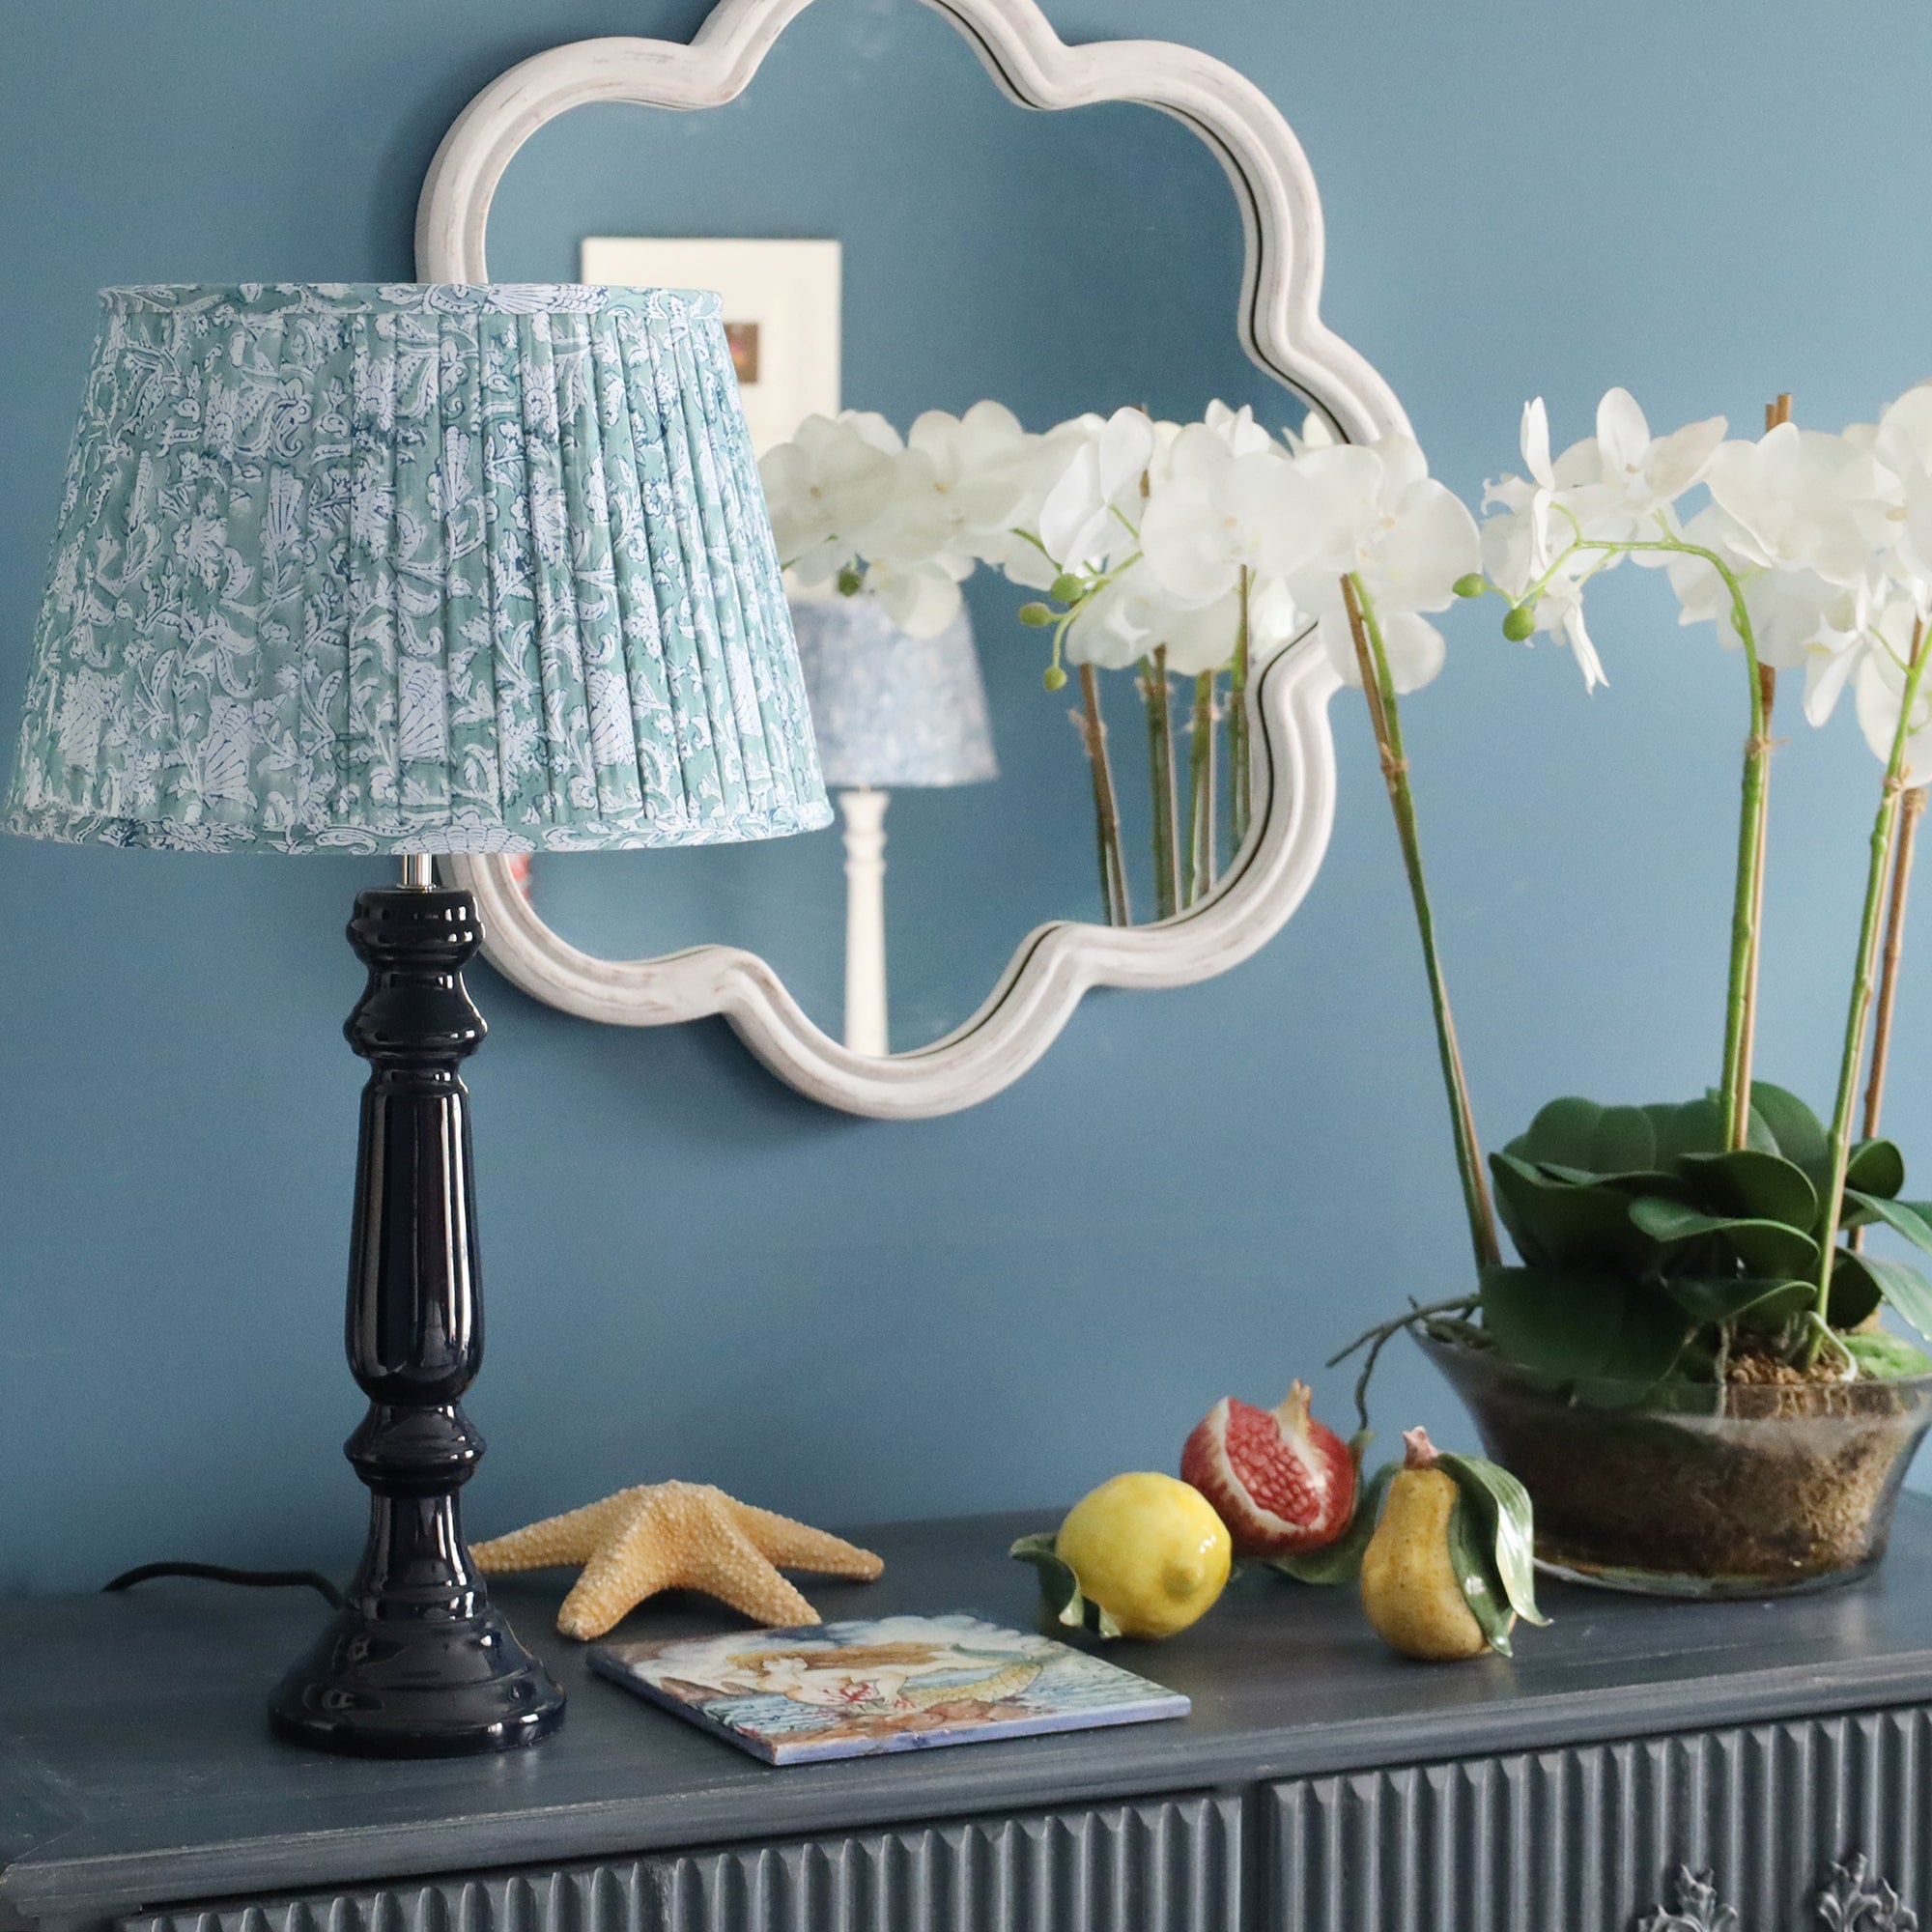 Navy Lacquer Zennor lampbase with a pleated lampshade on a sideboard.On the sideboard are several ceramic fruits,stationery, an orchid in a pot and a starfish.Behind on the wall is a wave mirror